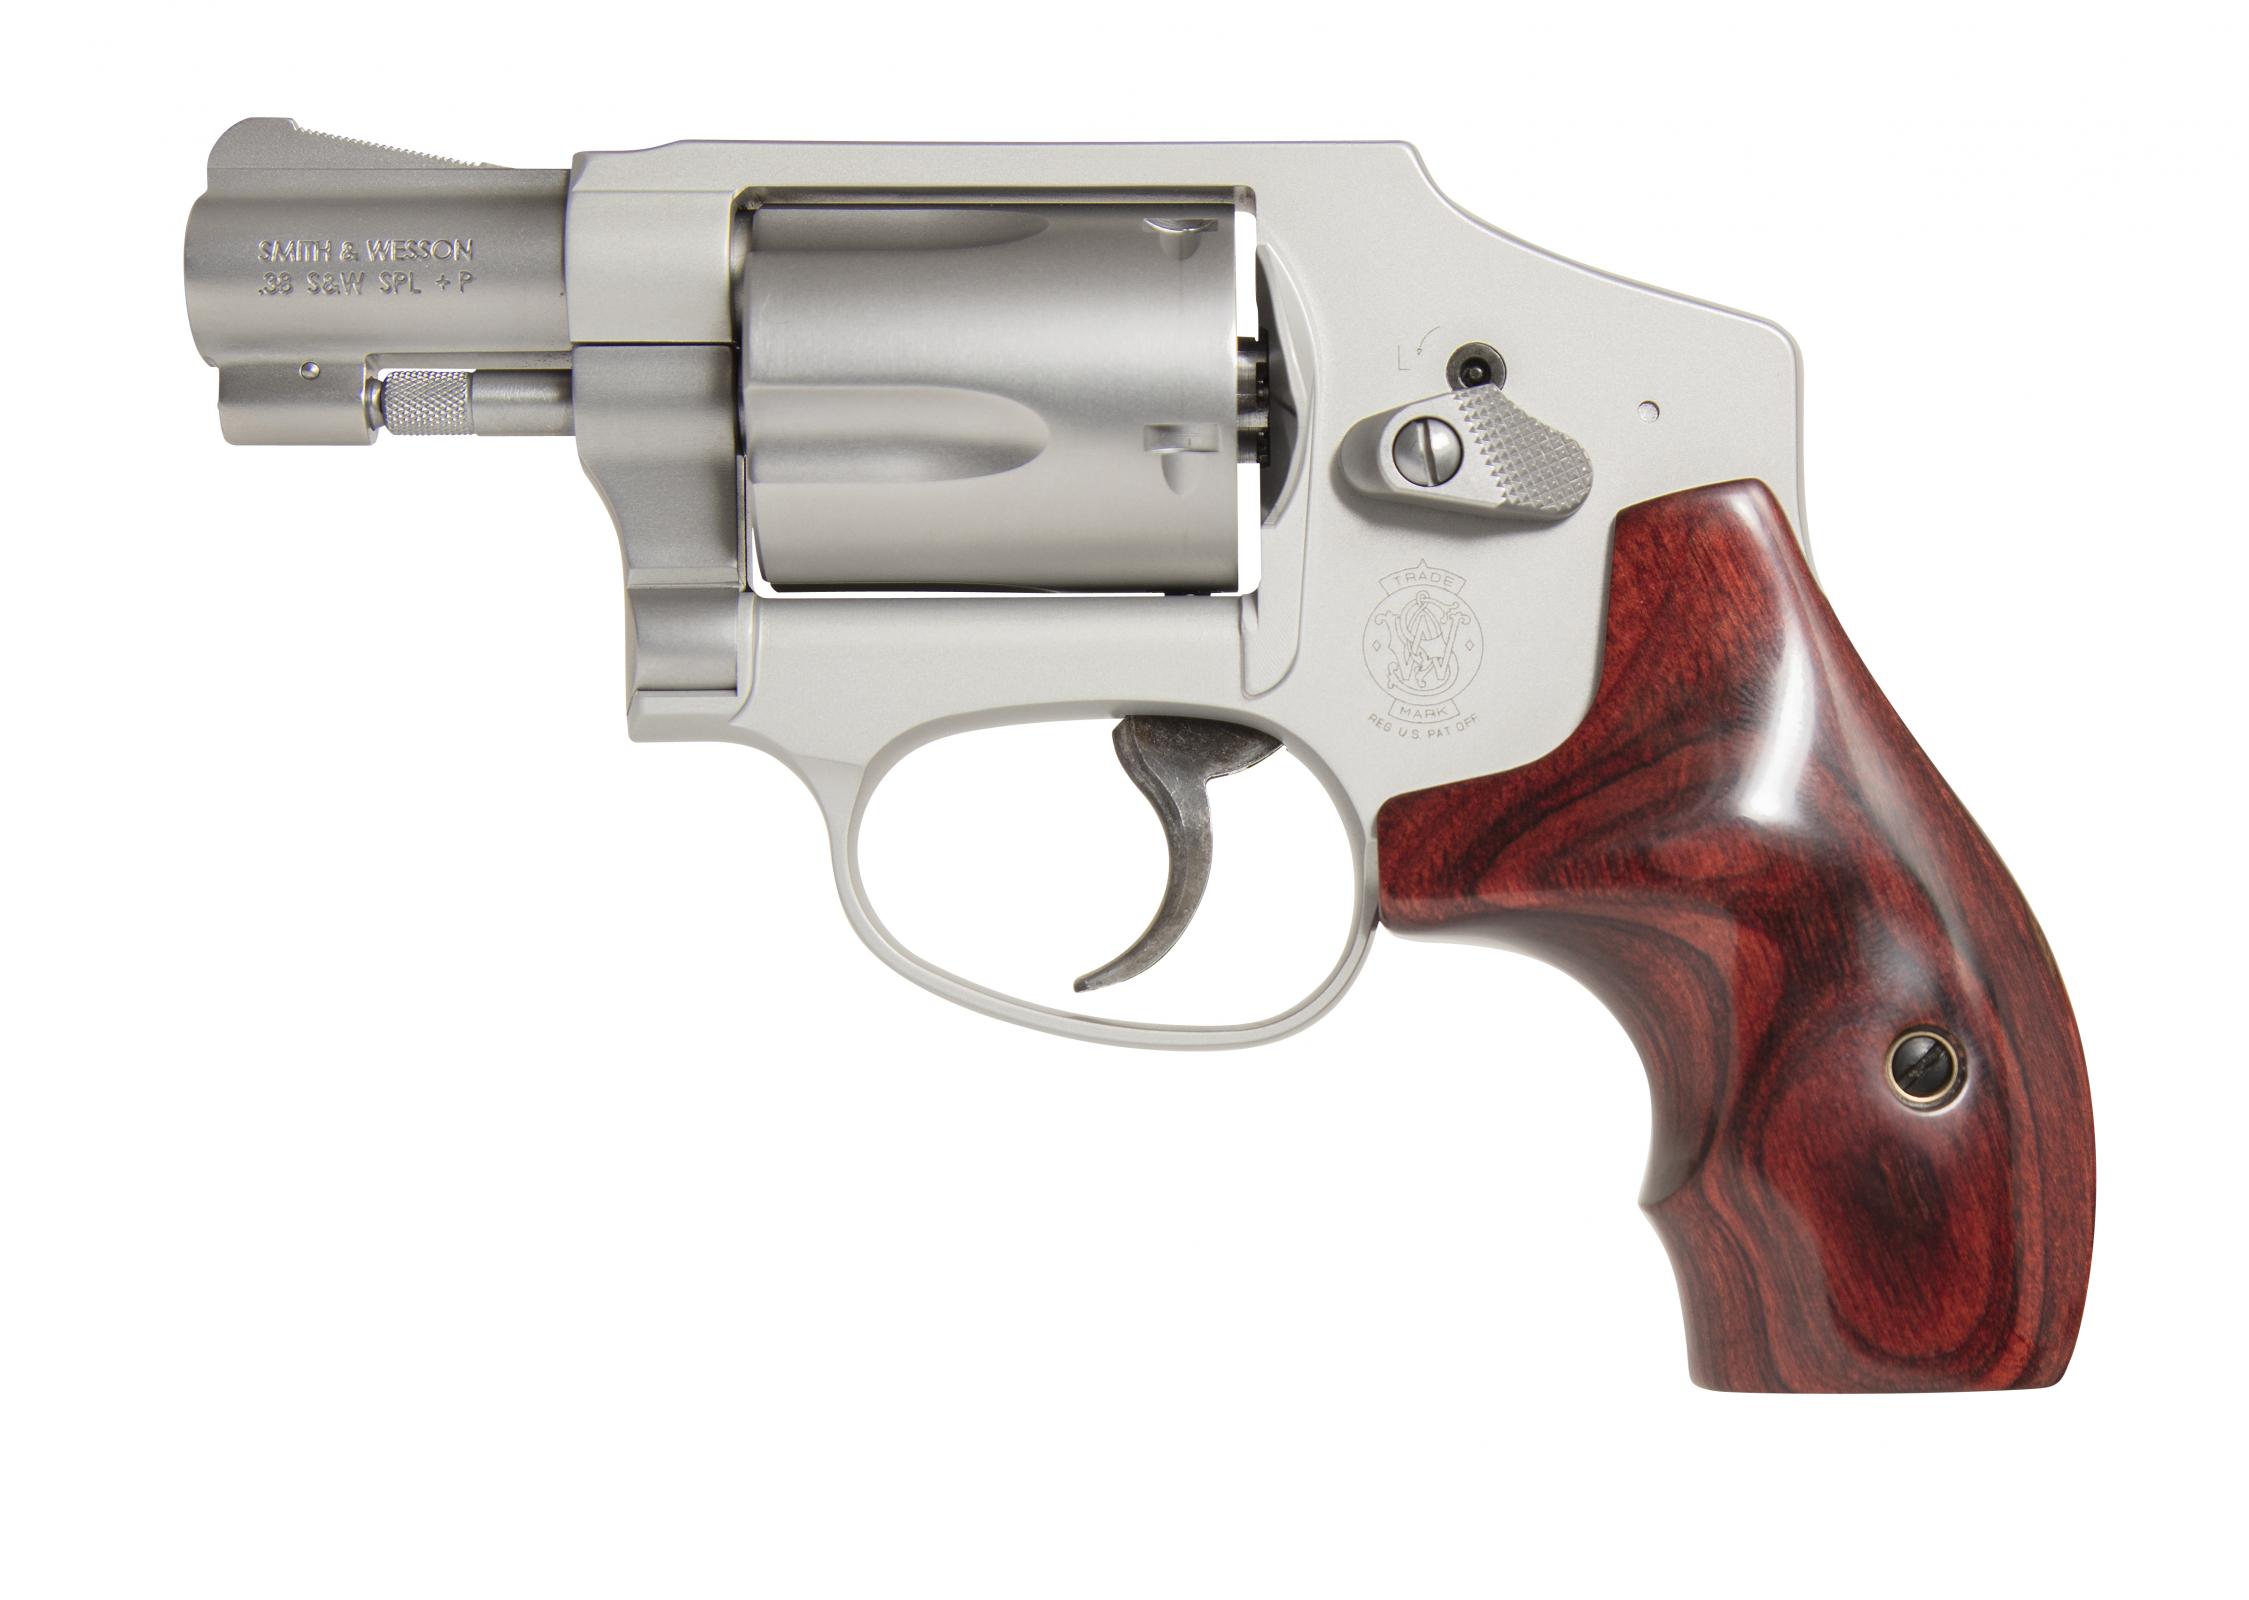 https://cityarsenal.com/product/smith-wesson-642ls-ladysmith-38-special-revolver-stainless-steel/